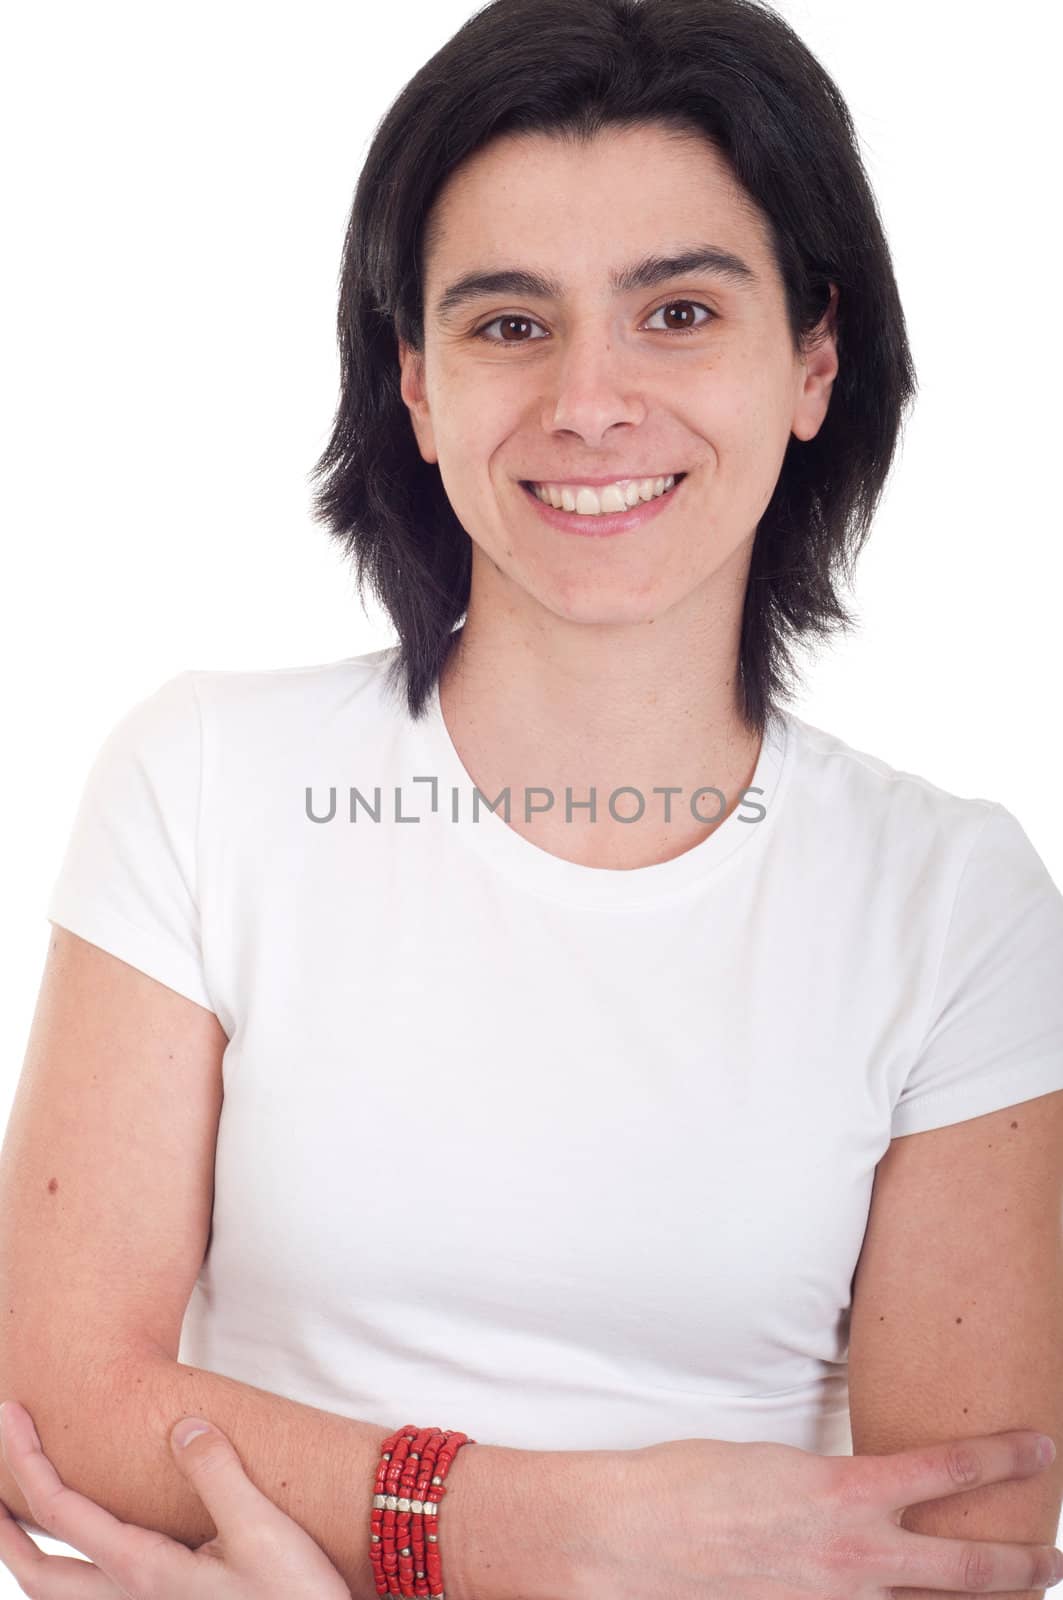 smiling casual woman portrait isolated on white background (folded arms)